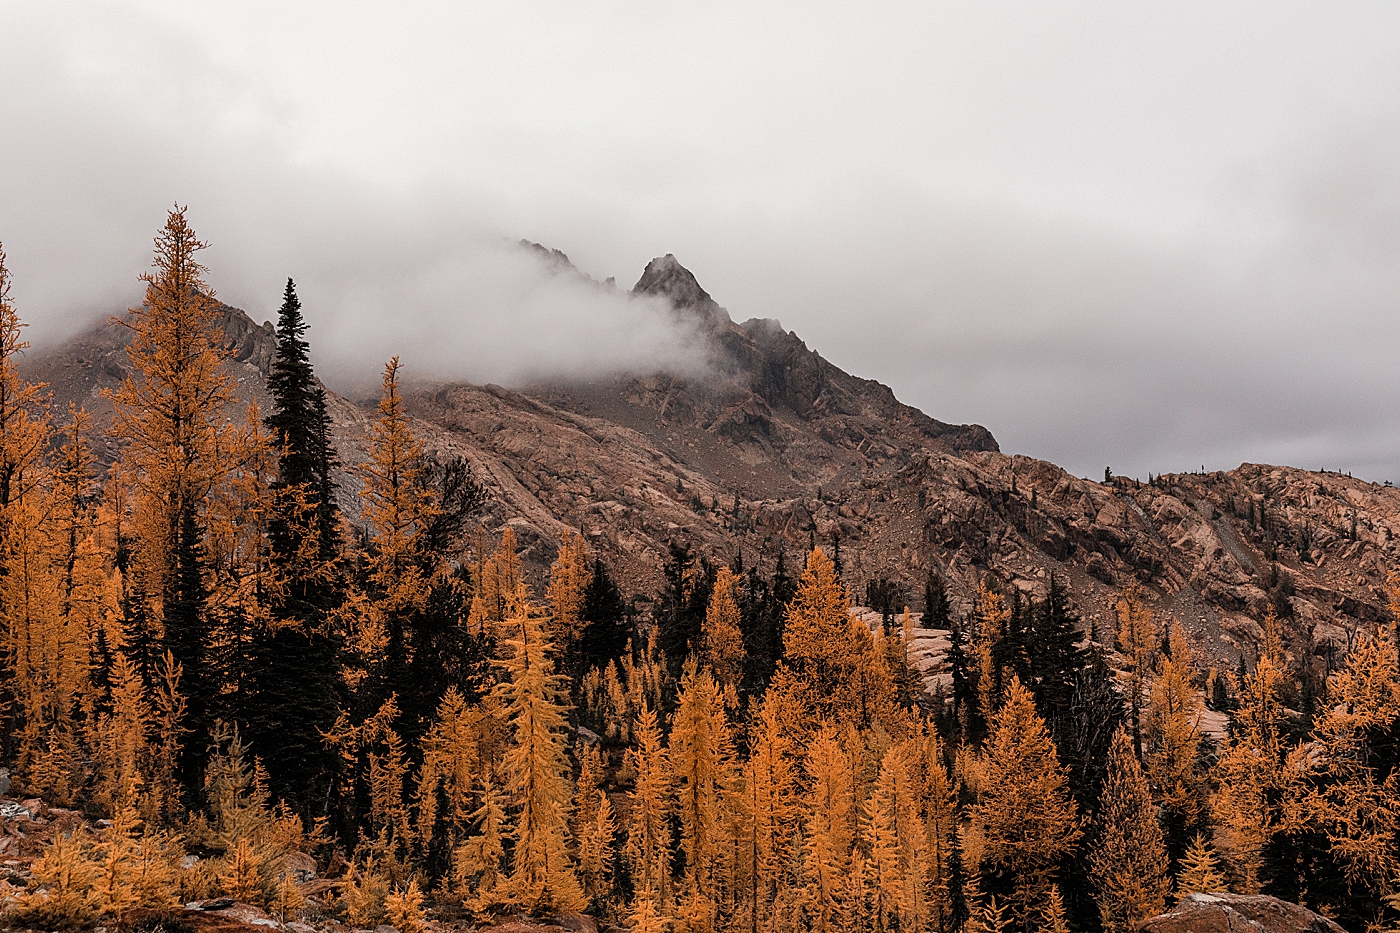 Larches in the fall in Washington. Photo by Megan Montalvo Photography.